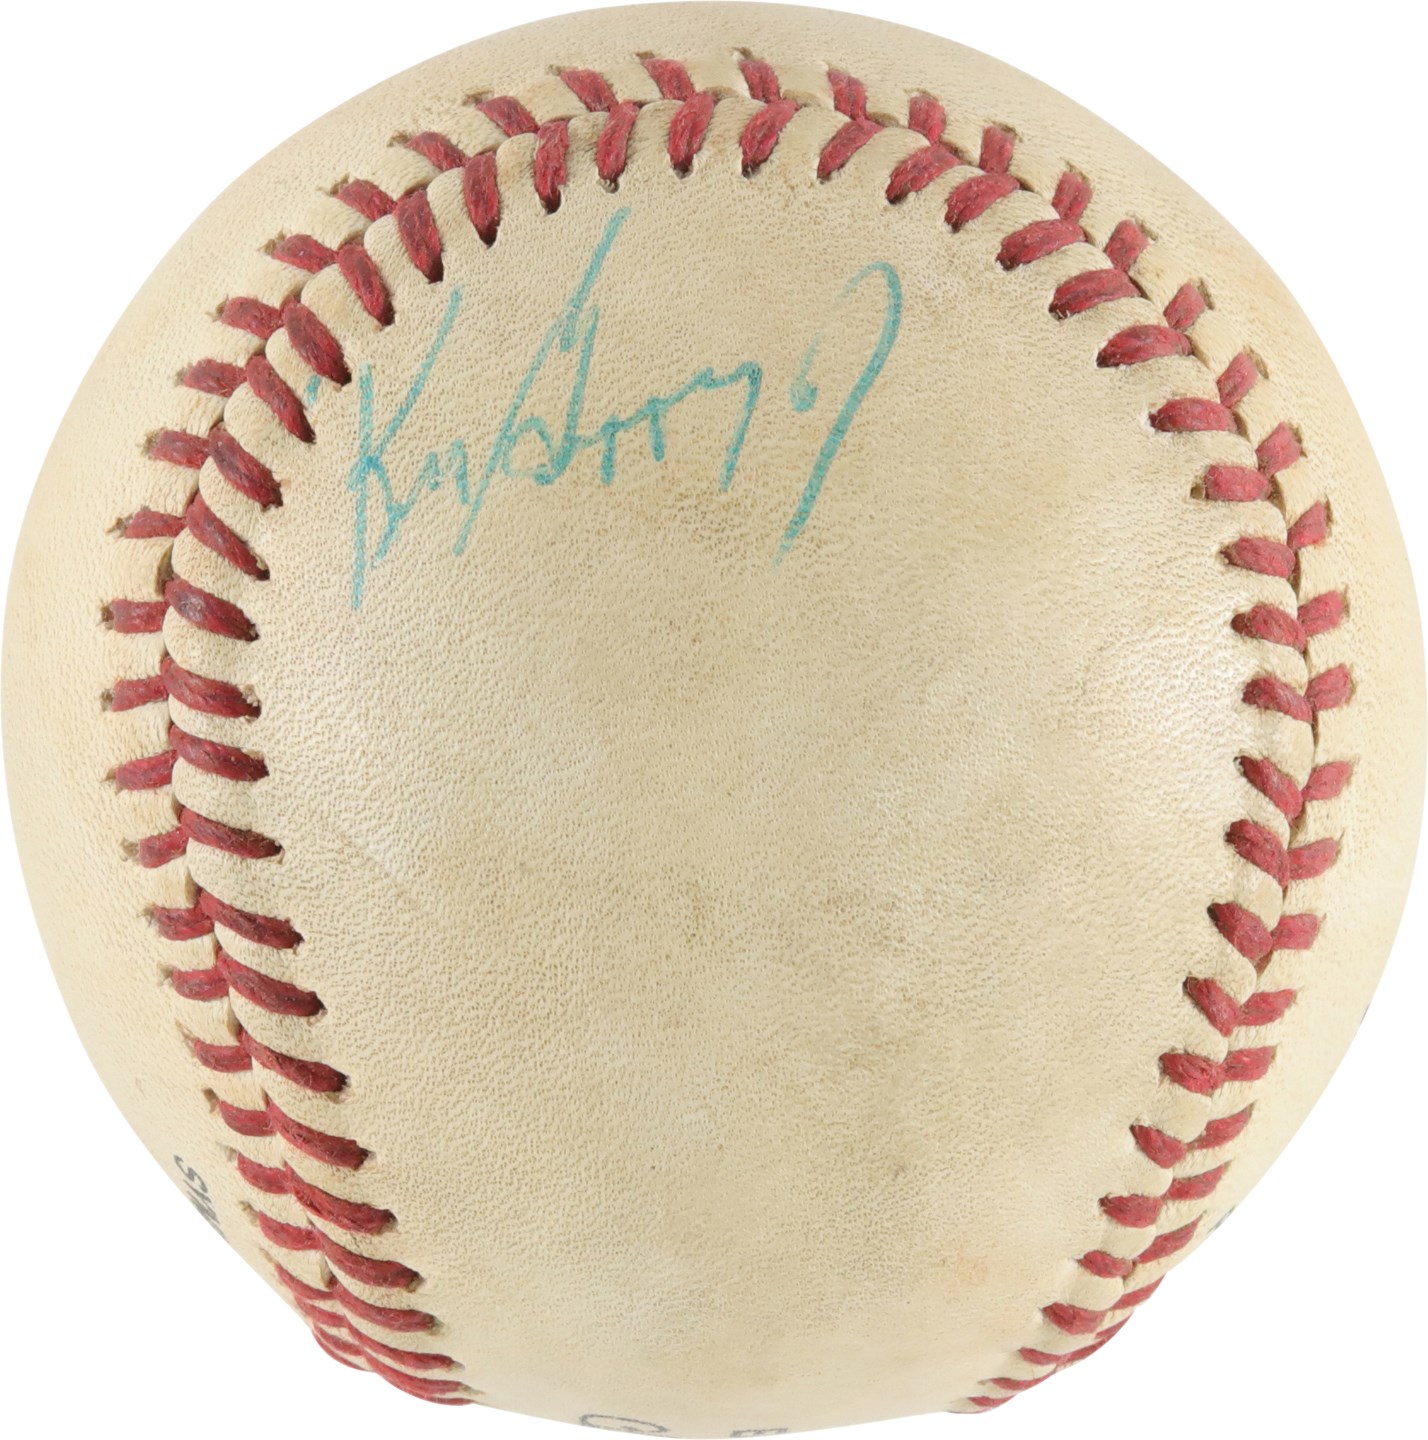 1988 Ken Griffey Jr Signed Game Used Baseball Attributed to First Home Run with Vermont Mariners